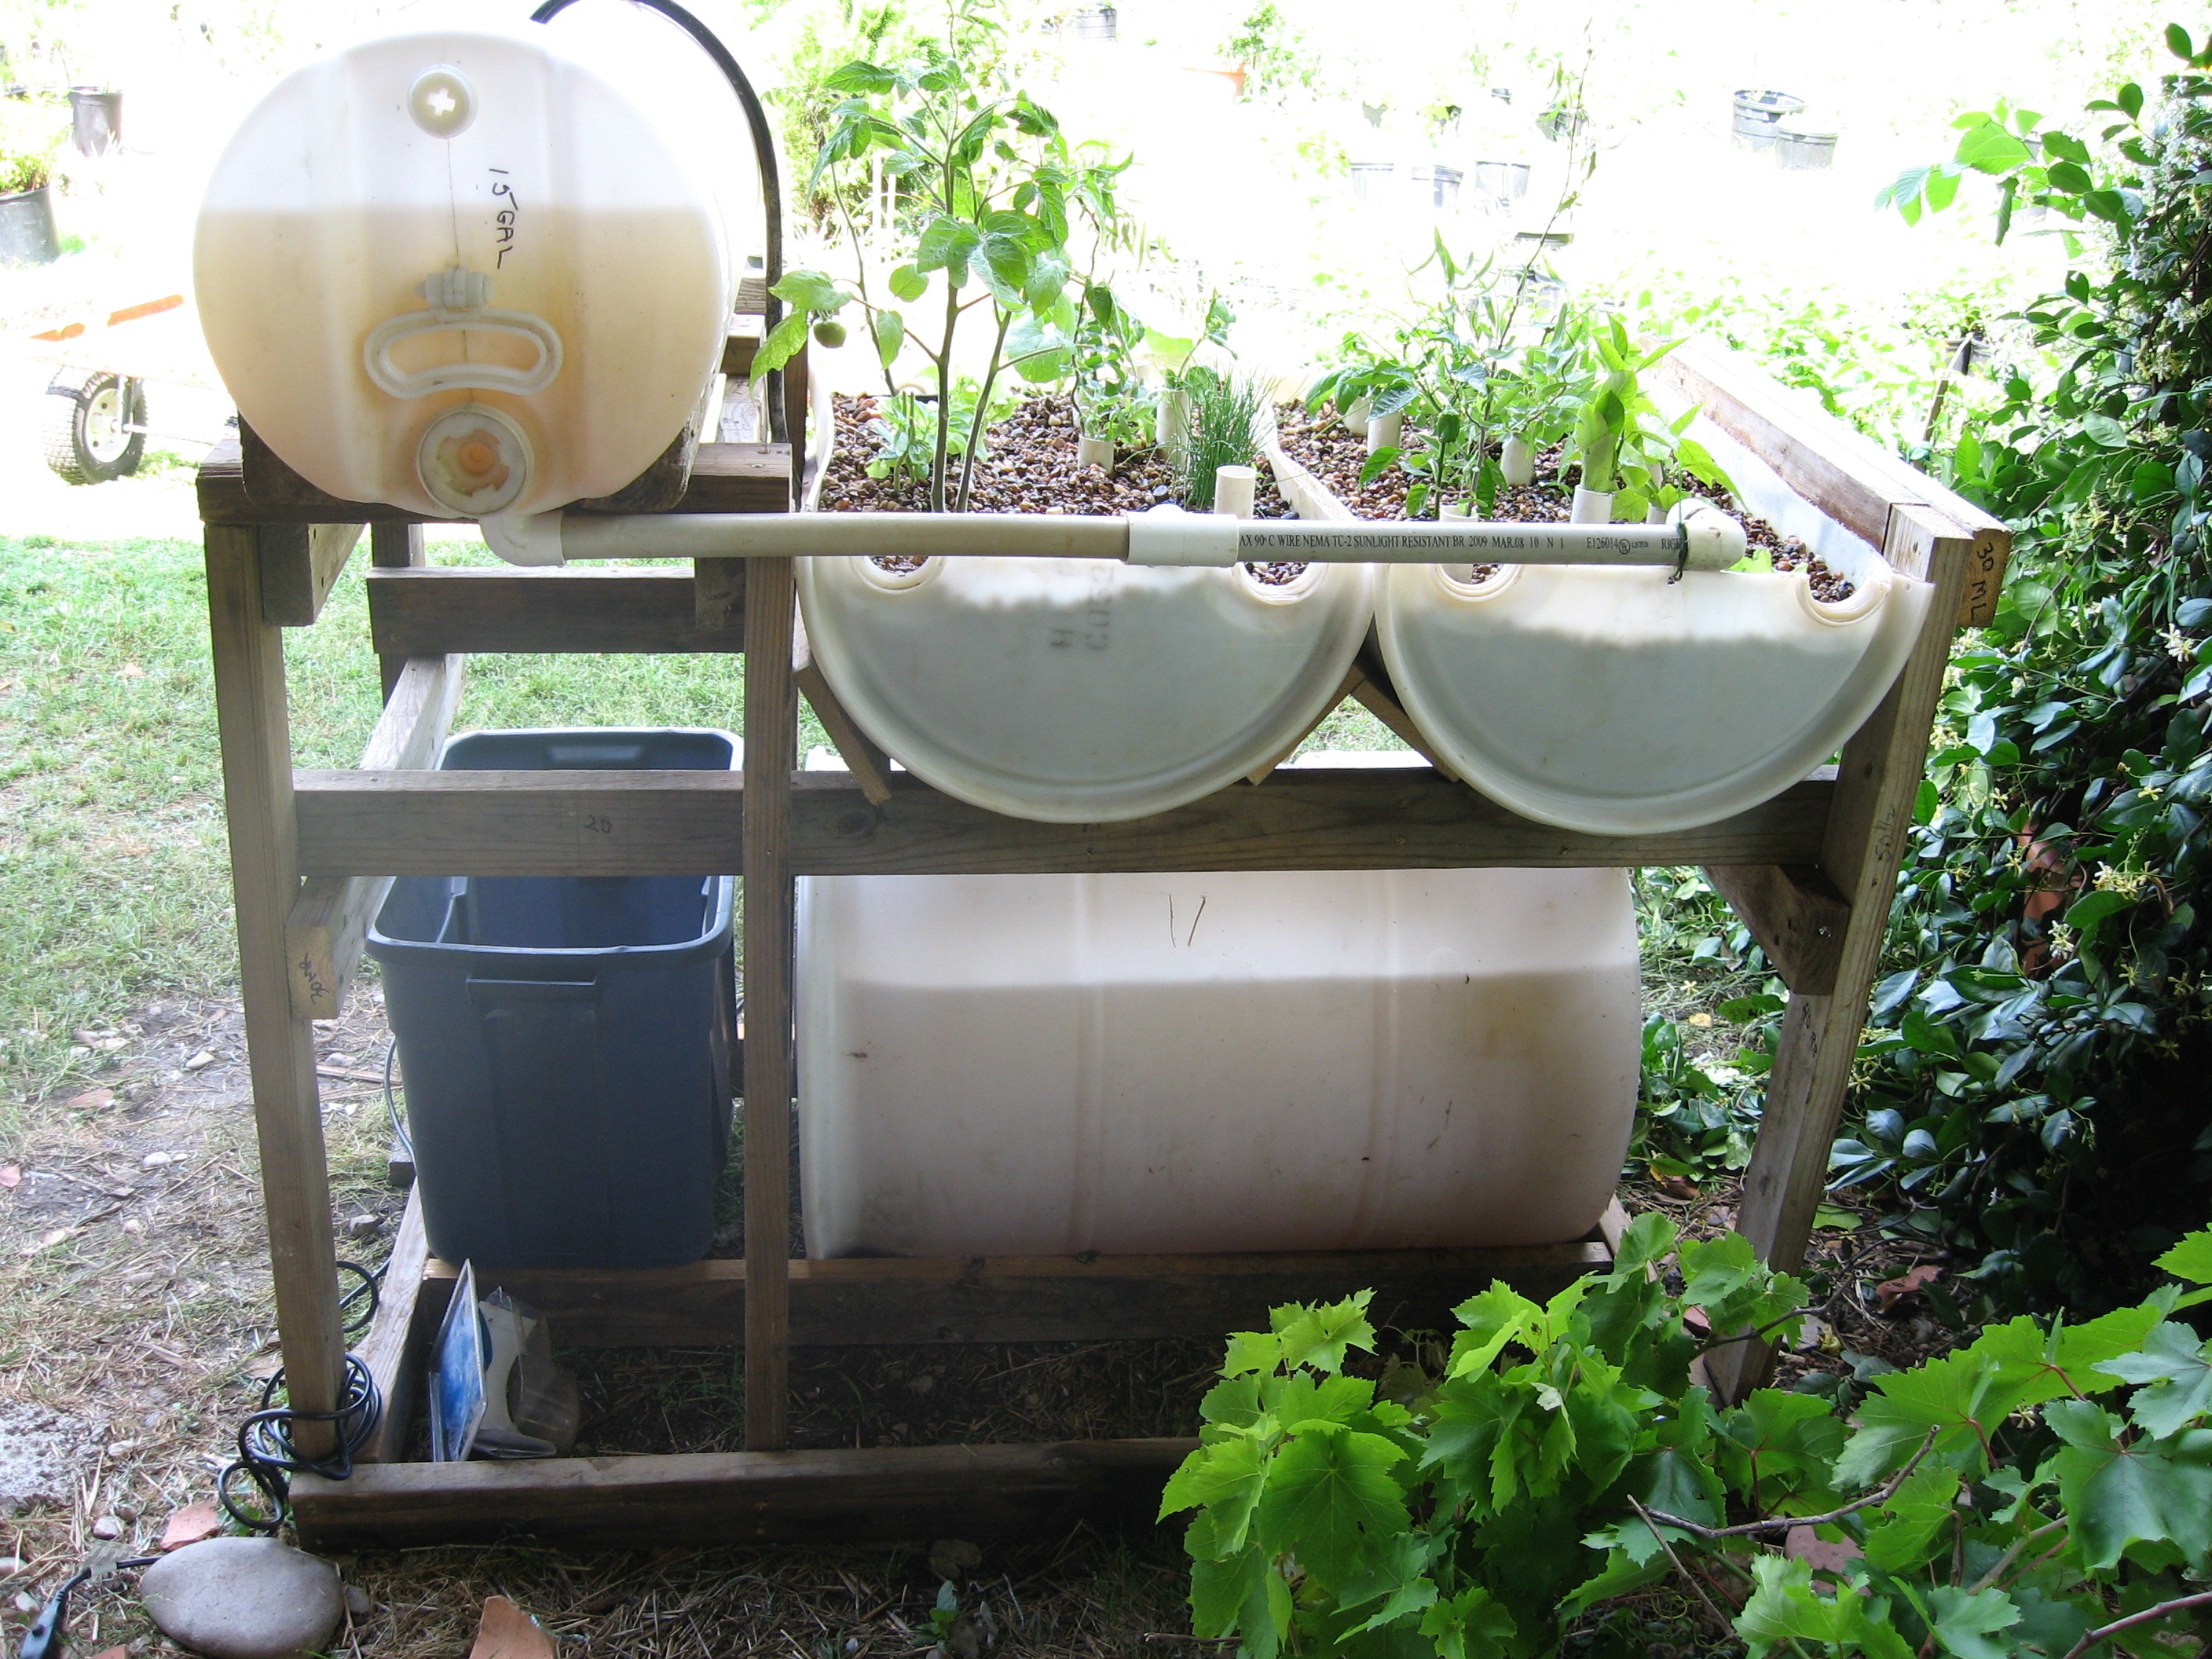 Aquaponics System Complete with Plants | Permaculture Project